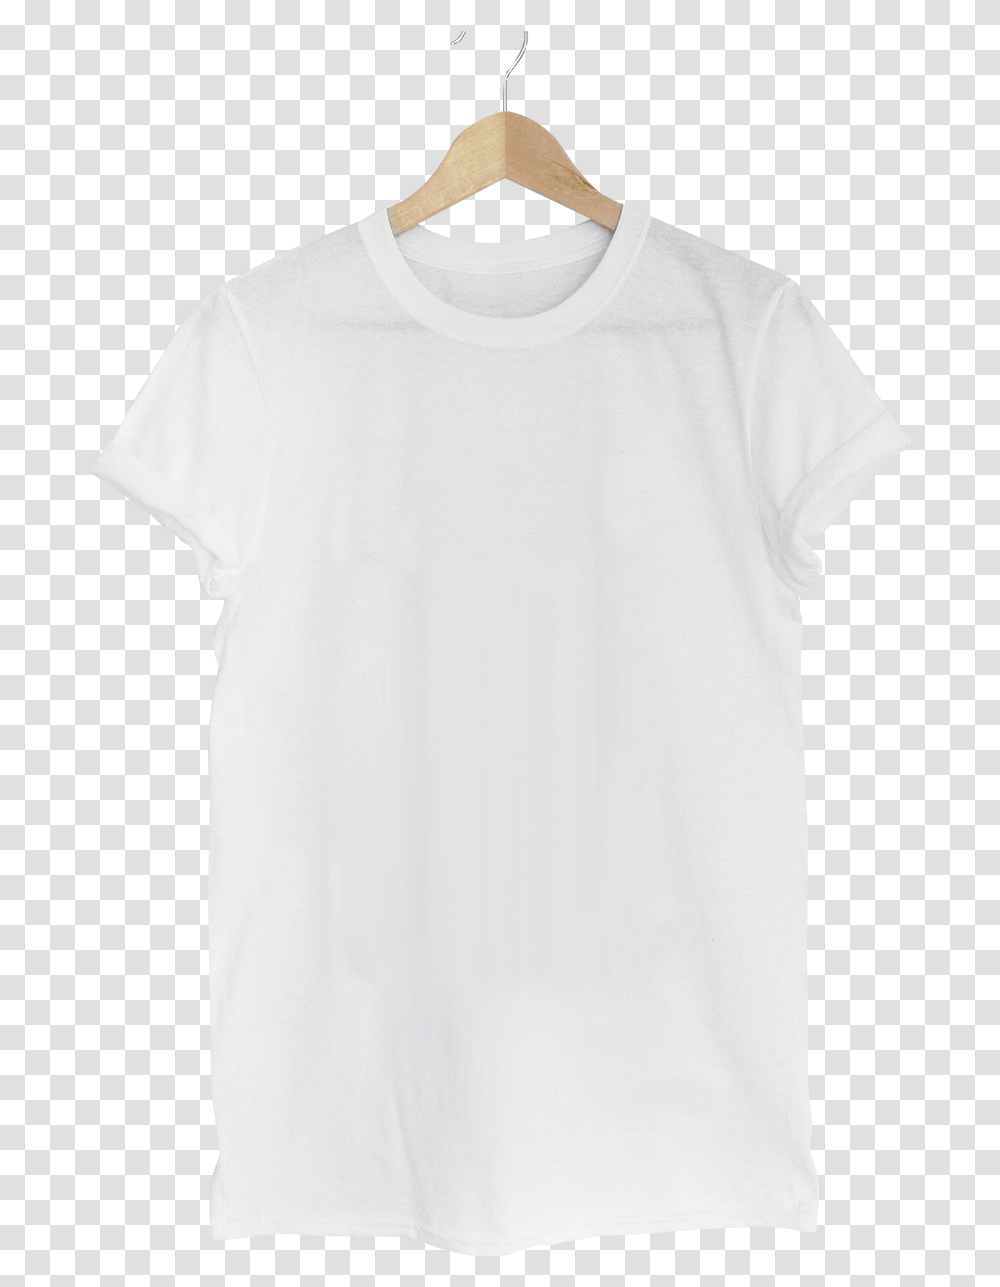 Plain White Tee Clothes Hanger, Clothing, Apparel, T-Shirt, Sleeve Transparent Png